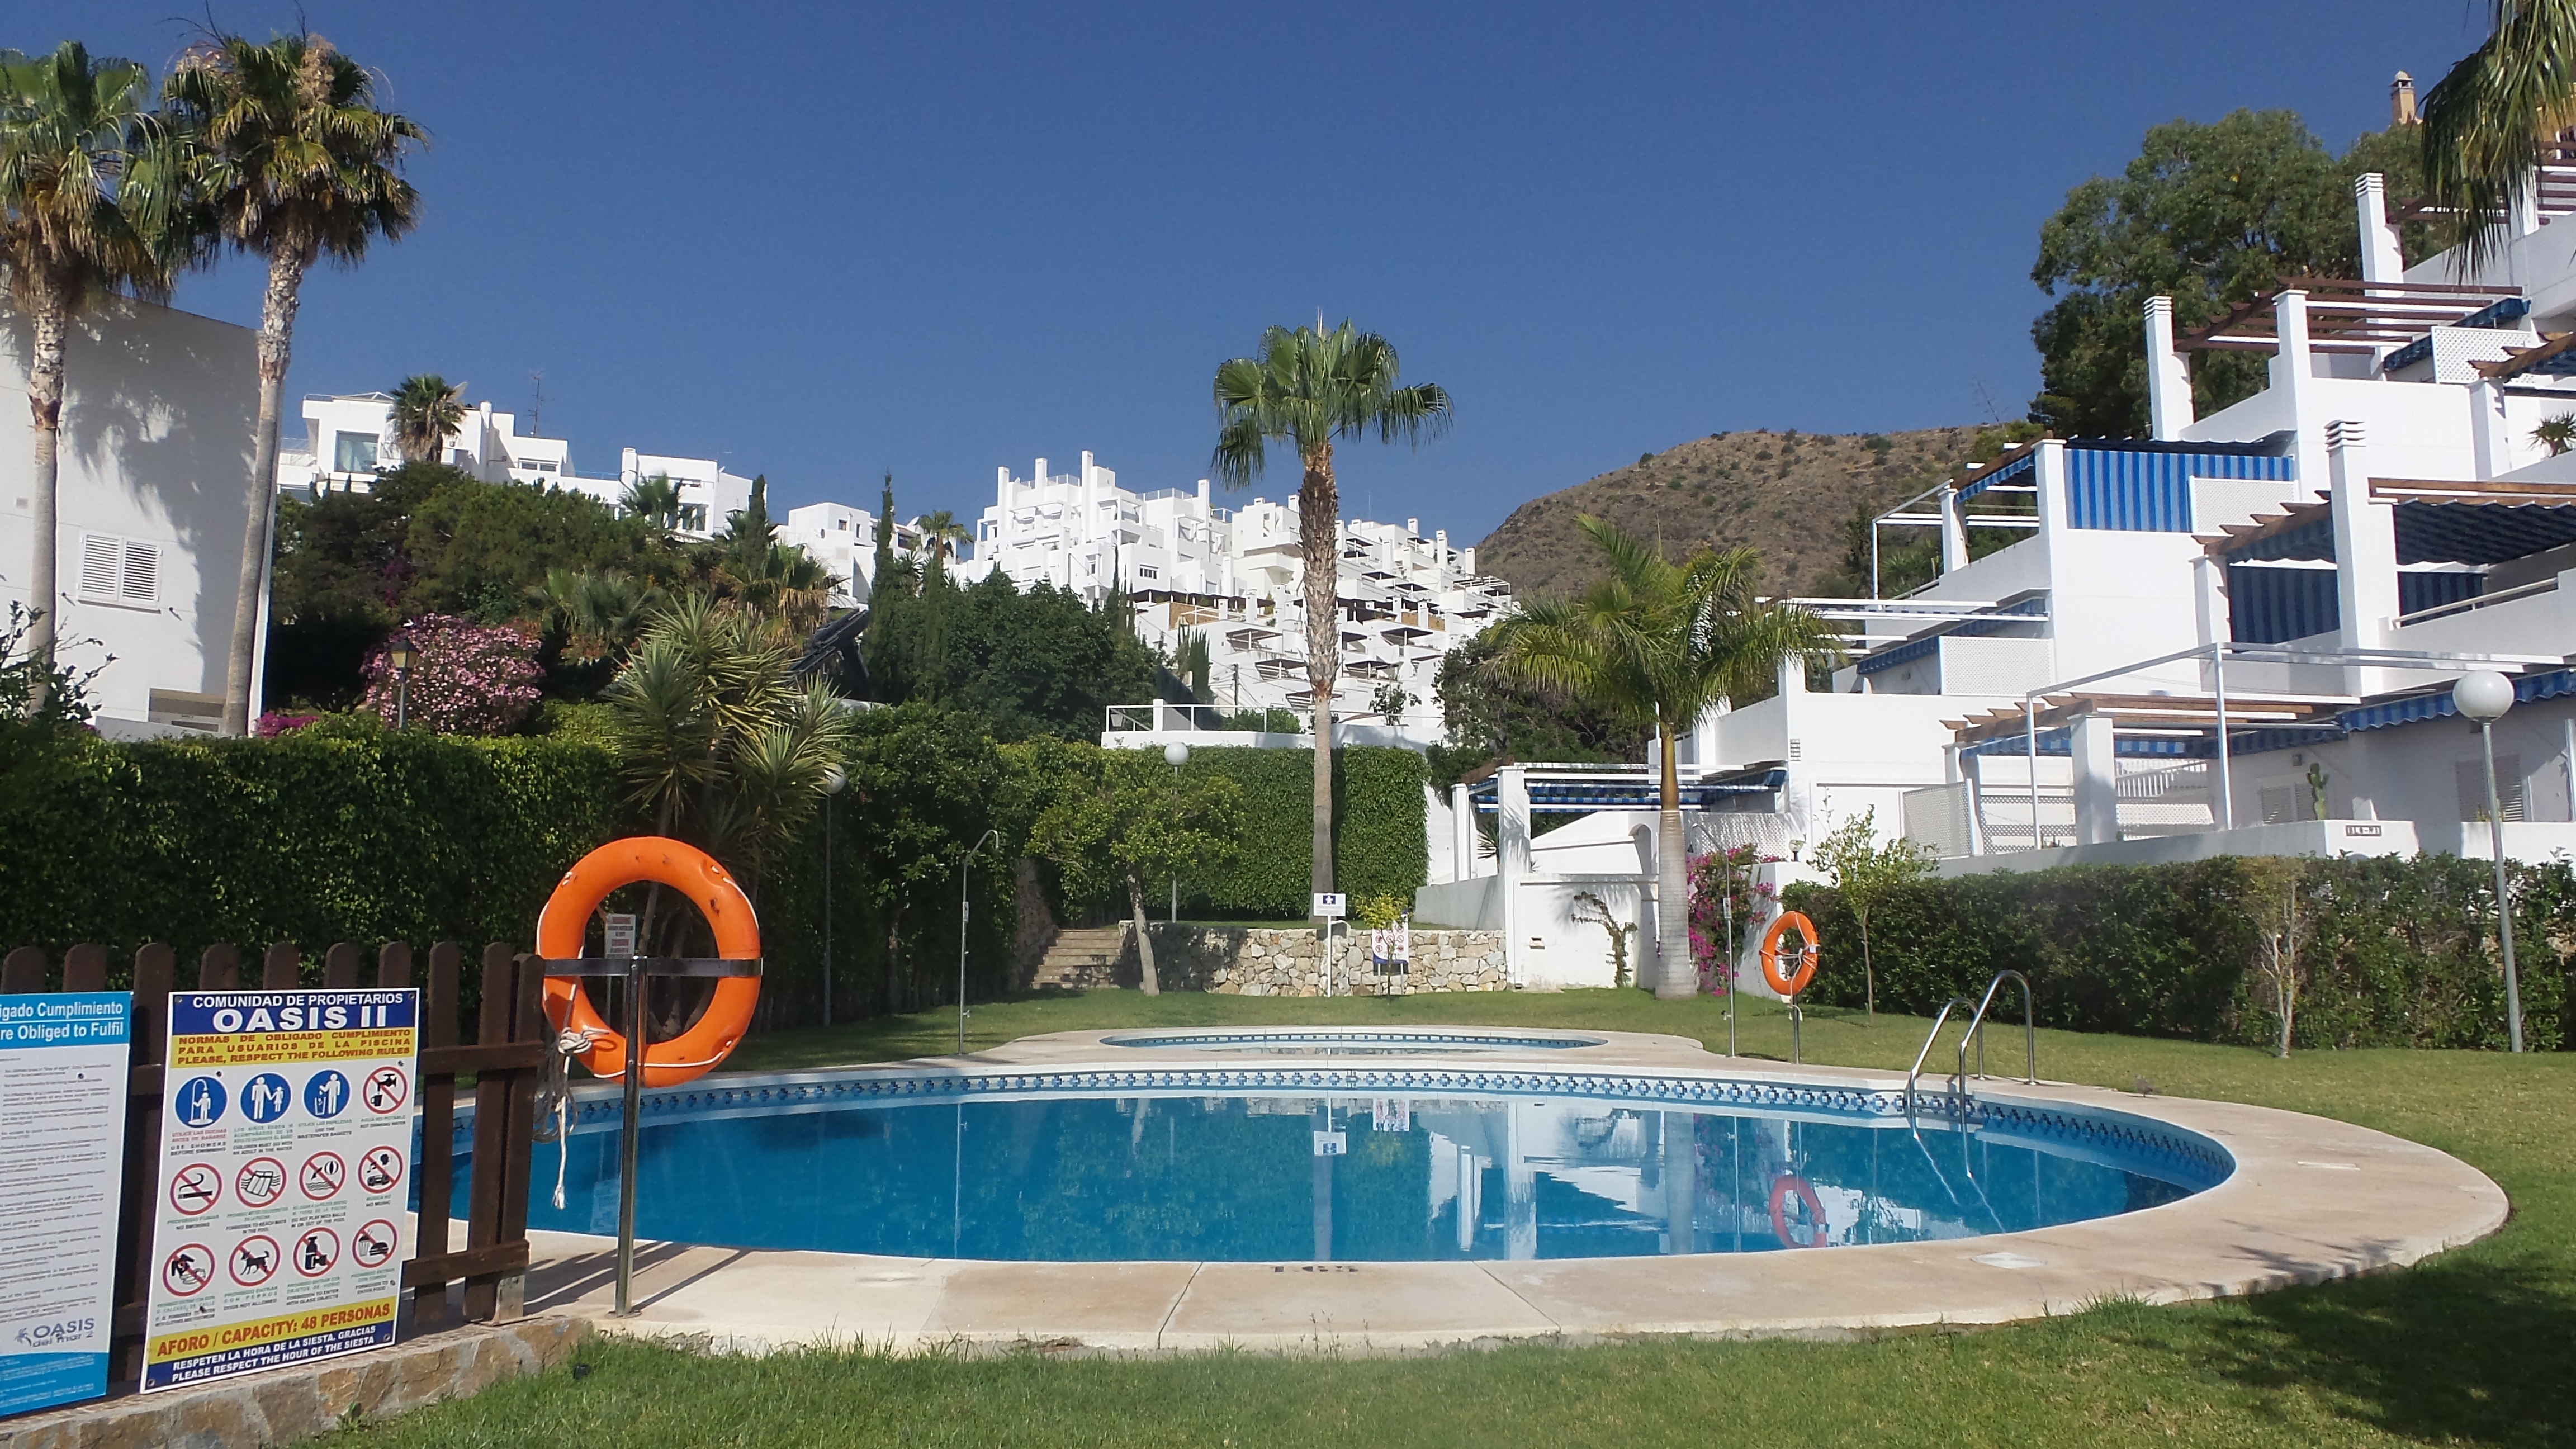 Lovely South Facing apartment : Apartment for Rent in Ventanicas-El Cantal, Almería